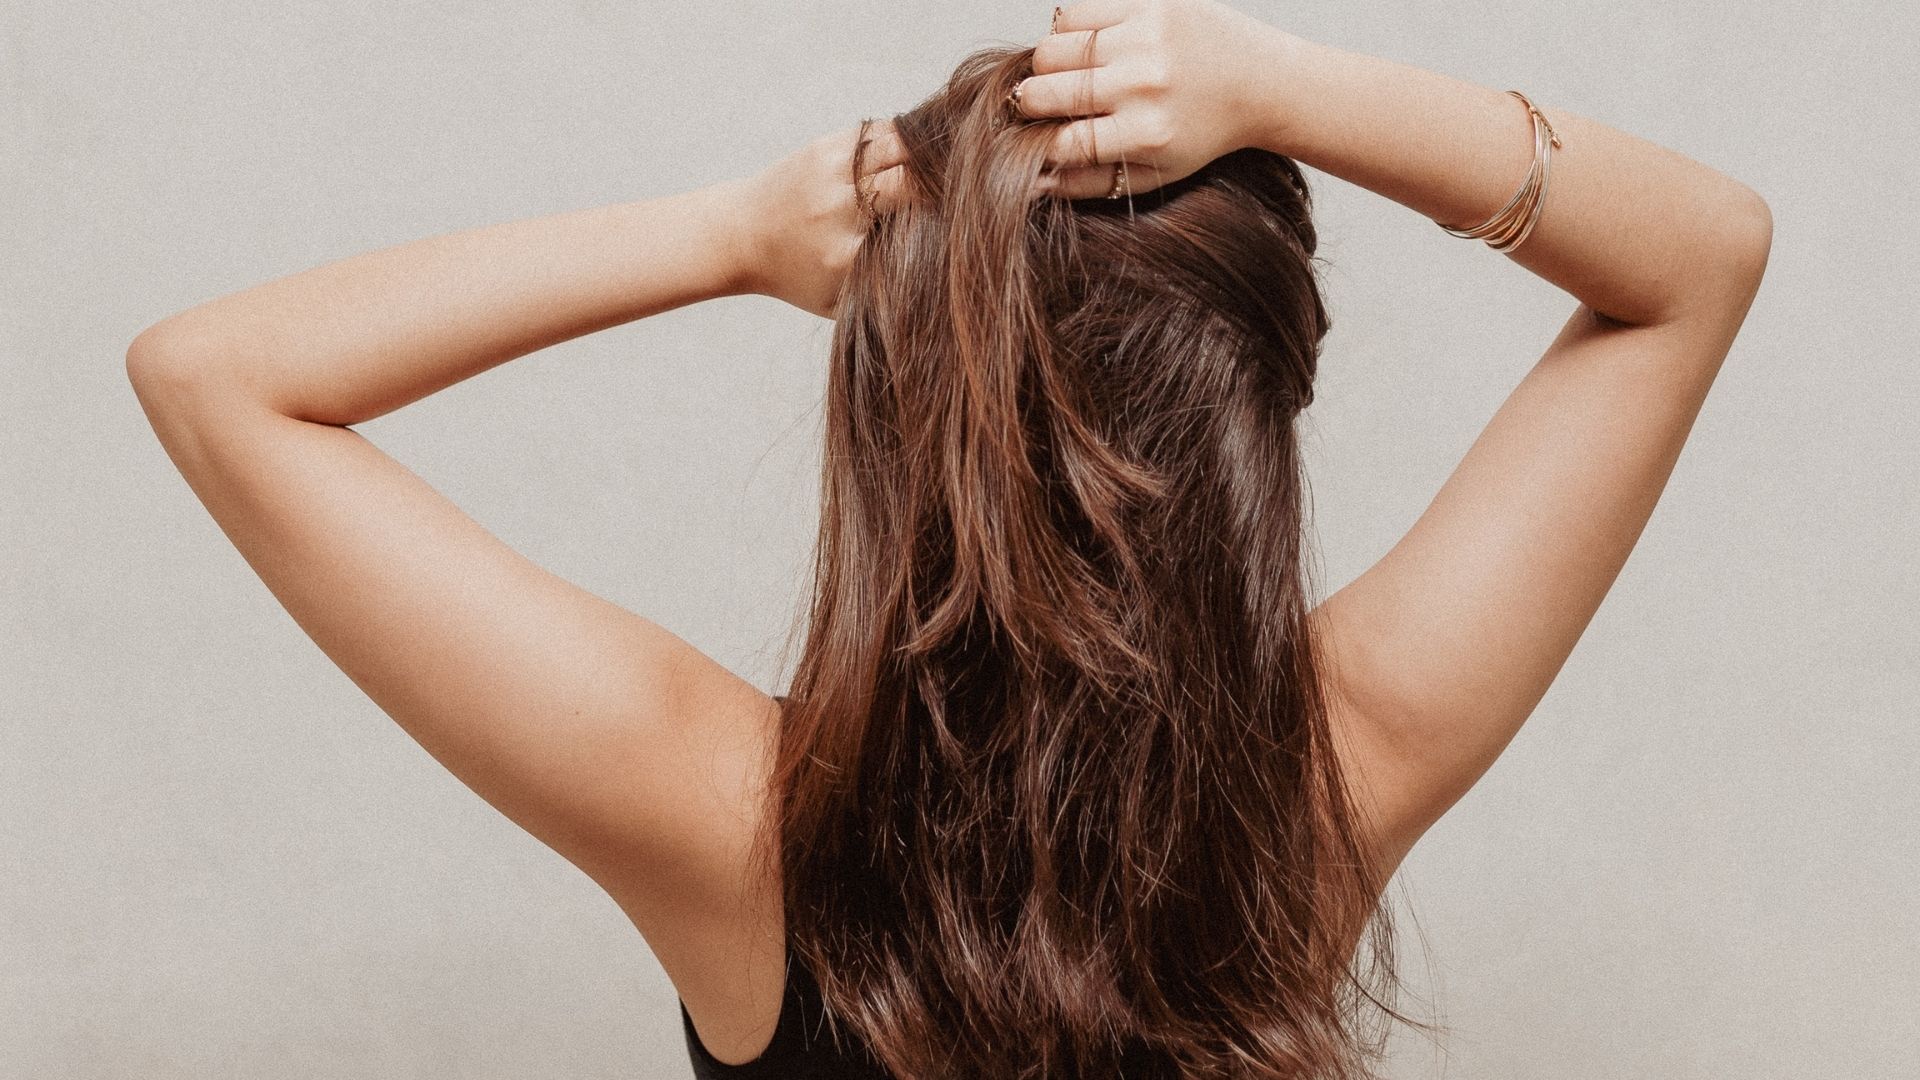 5 Home Remedies to Improve and Prevent Split Ends